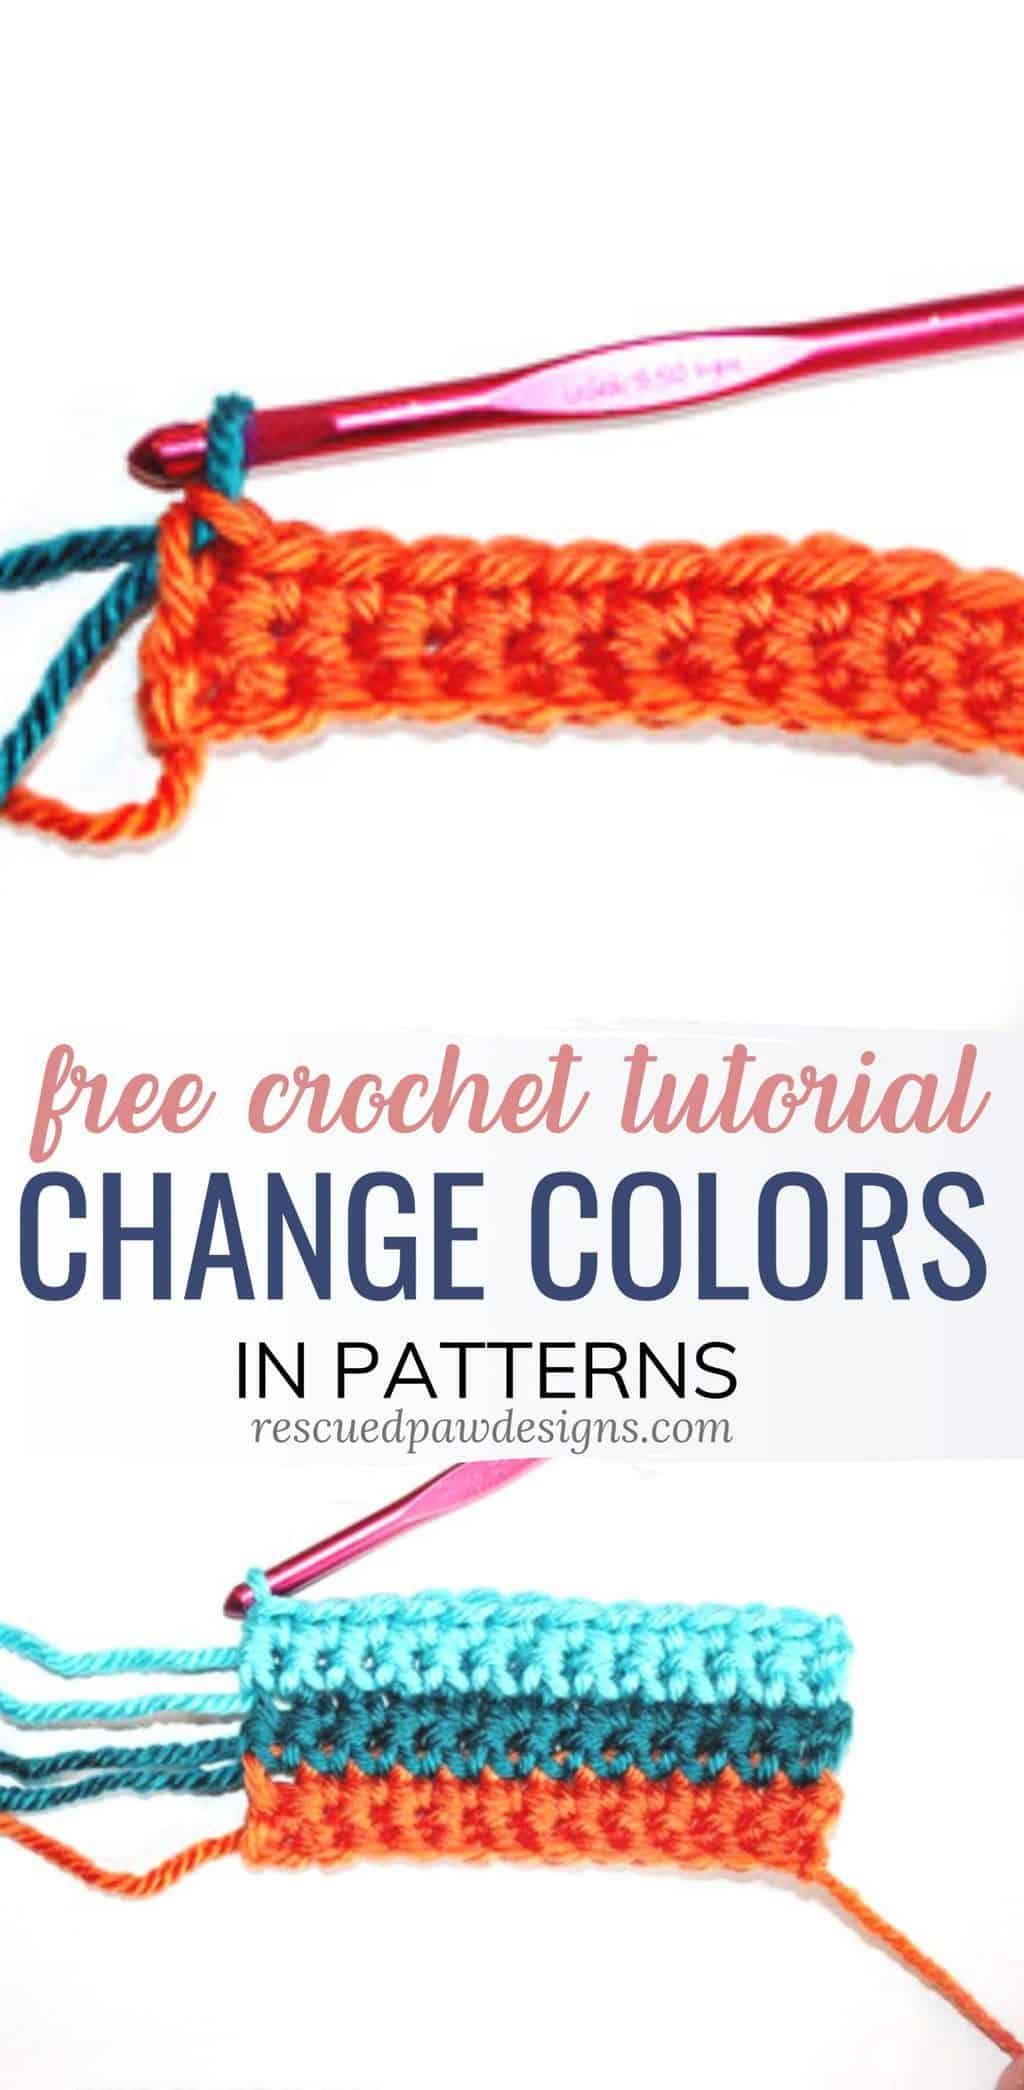 How to Change Yarn in Crochet - Rescued Paw Designs -   17 knitting and crochet Projects crafts ideas